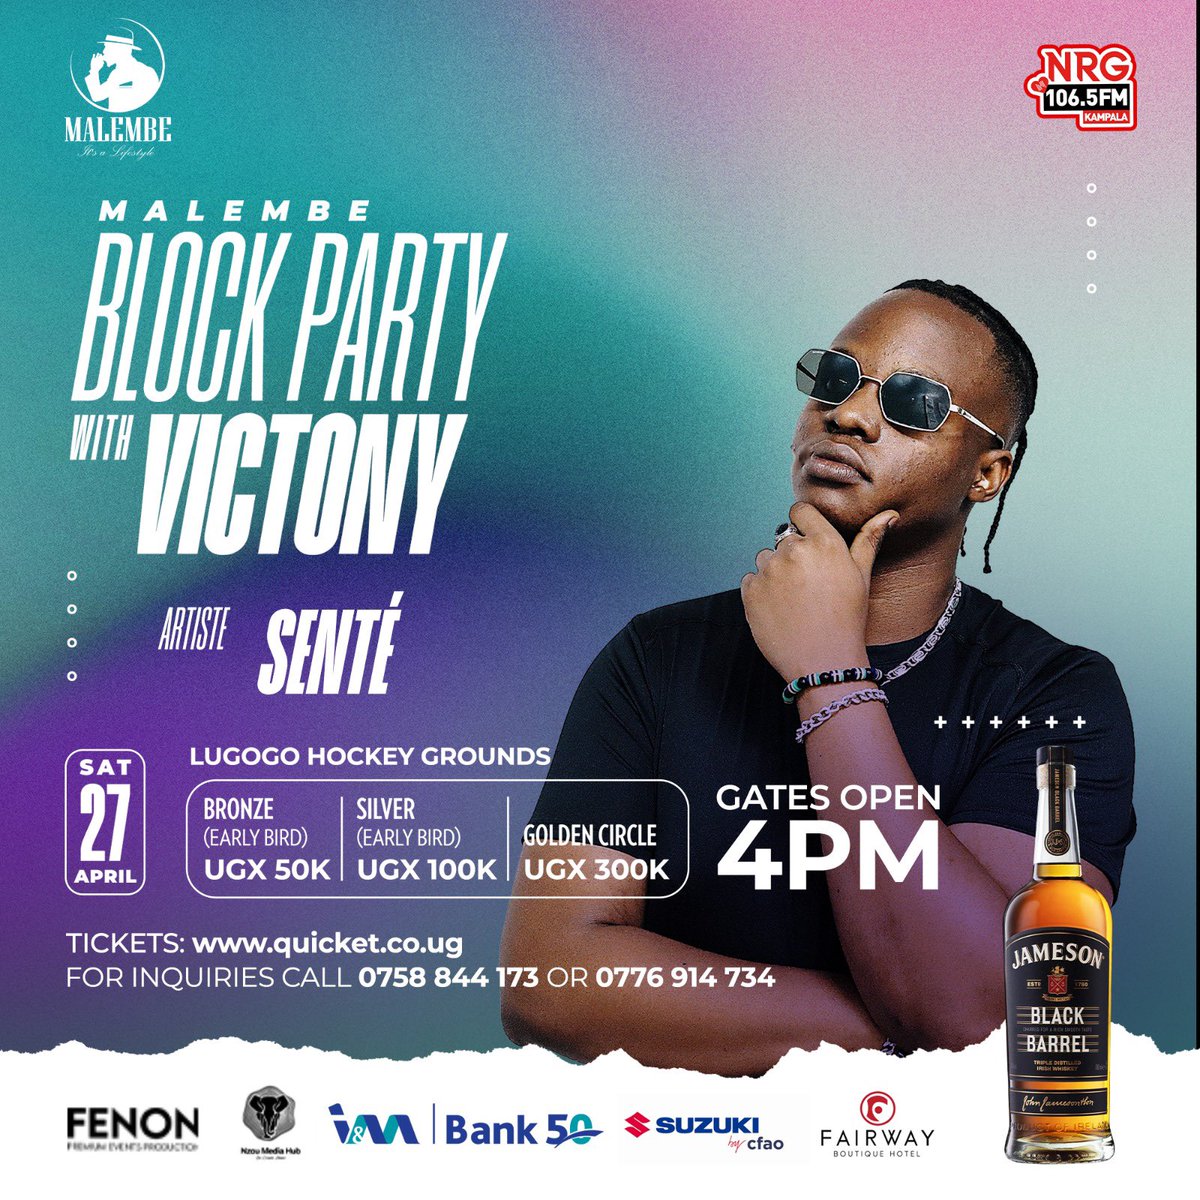 NEW ACTS on the BLOCK — SENTÉ

#VictonyBlockParty 🇺🇬✨

The Malembe Block Party featuring @vict0ny ✨
 
27/04 | Lugogo Hockey Grounds

In partnership with @NzouMedia @nrgradioug
 
Get your tickets now! (🔗 in bio)

~ #EnjoyResponsibly #MalembeLifestyle #ItsaLifestyle ✨